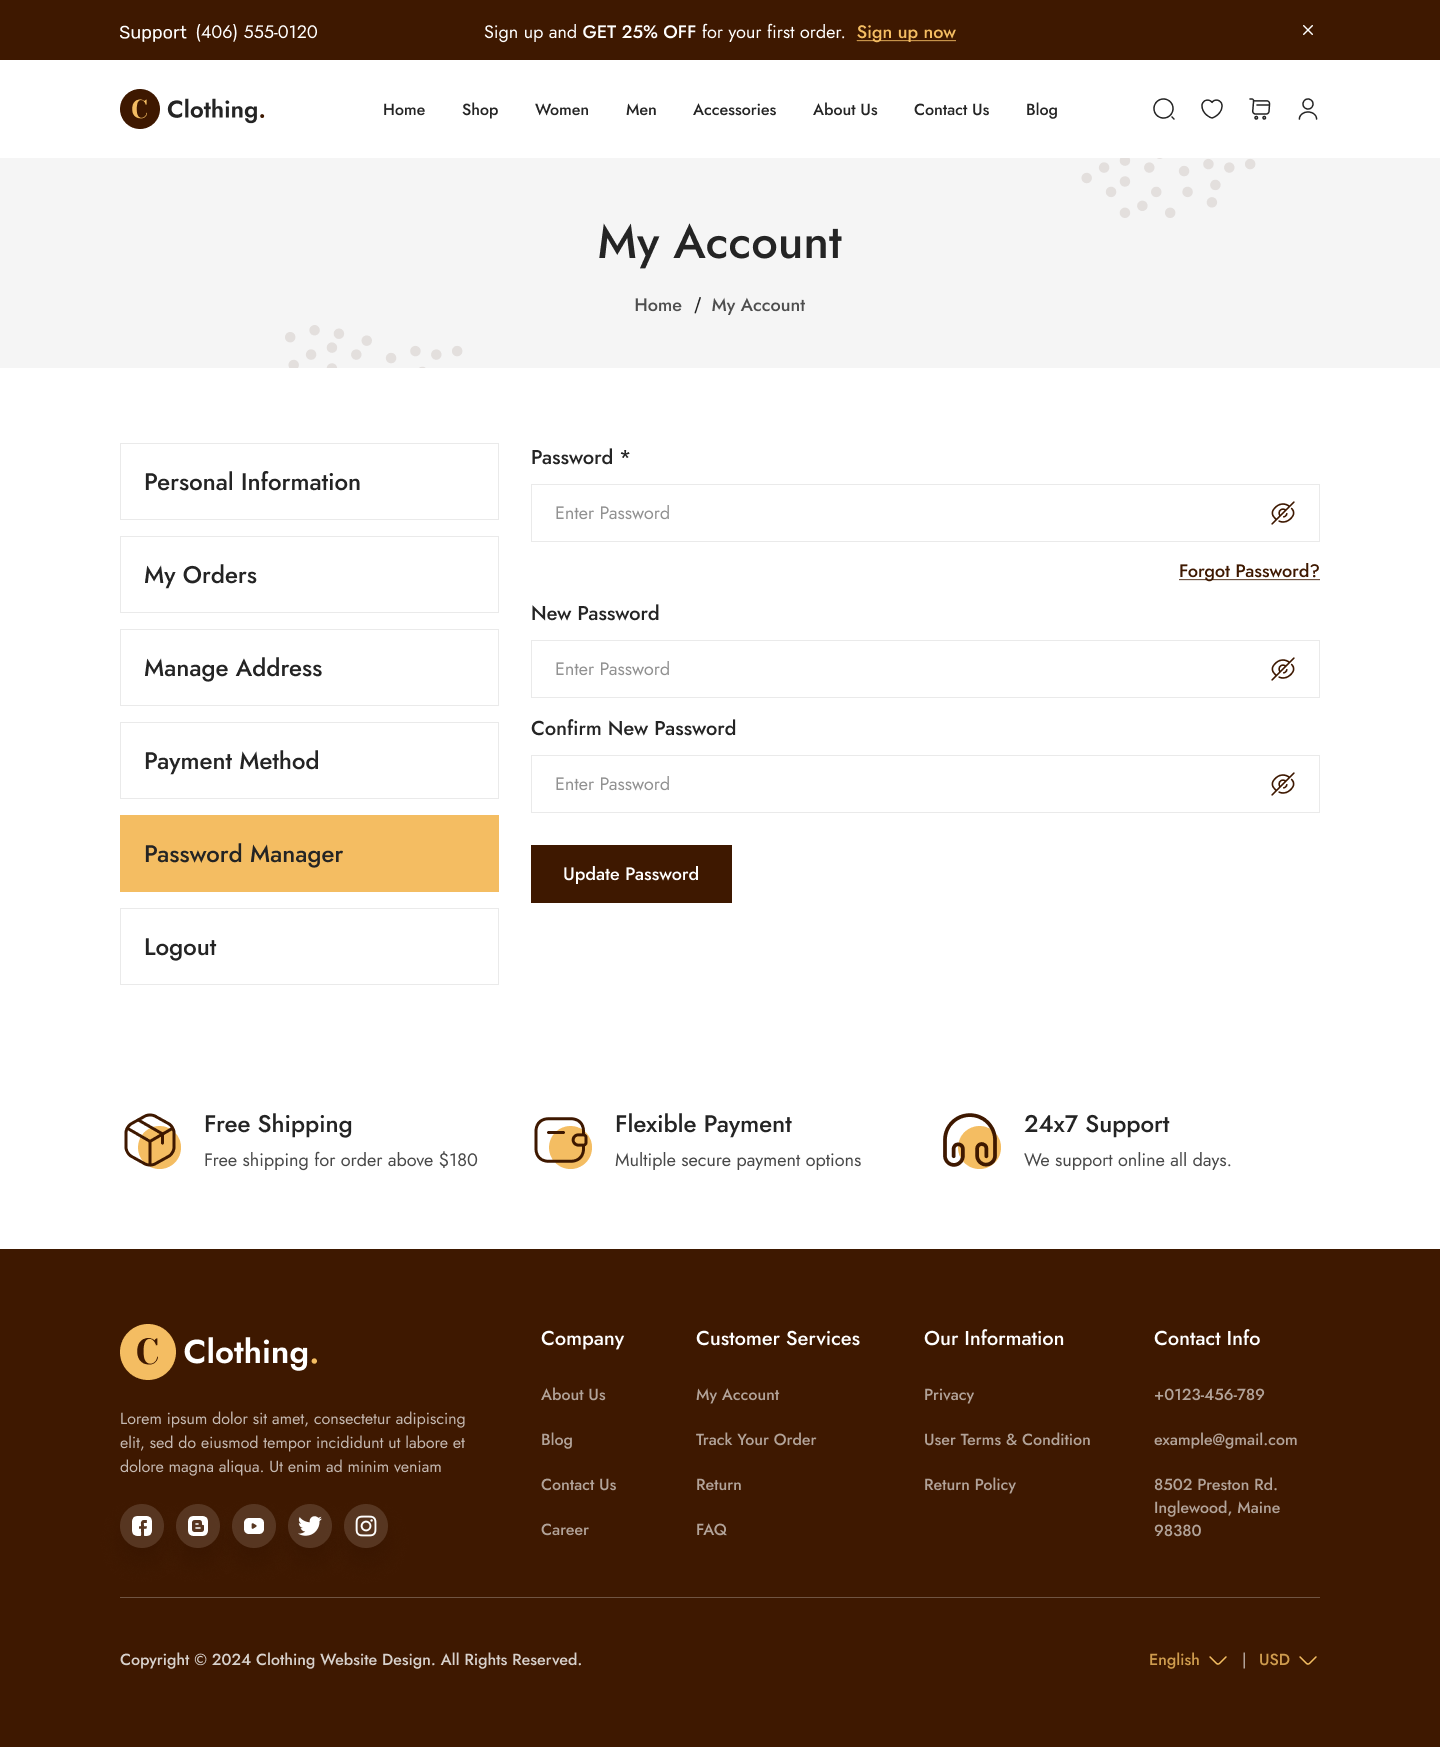 Clothing Store Website UI UX My Account-Password Manager Page Design